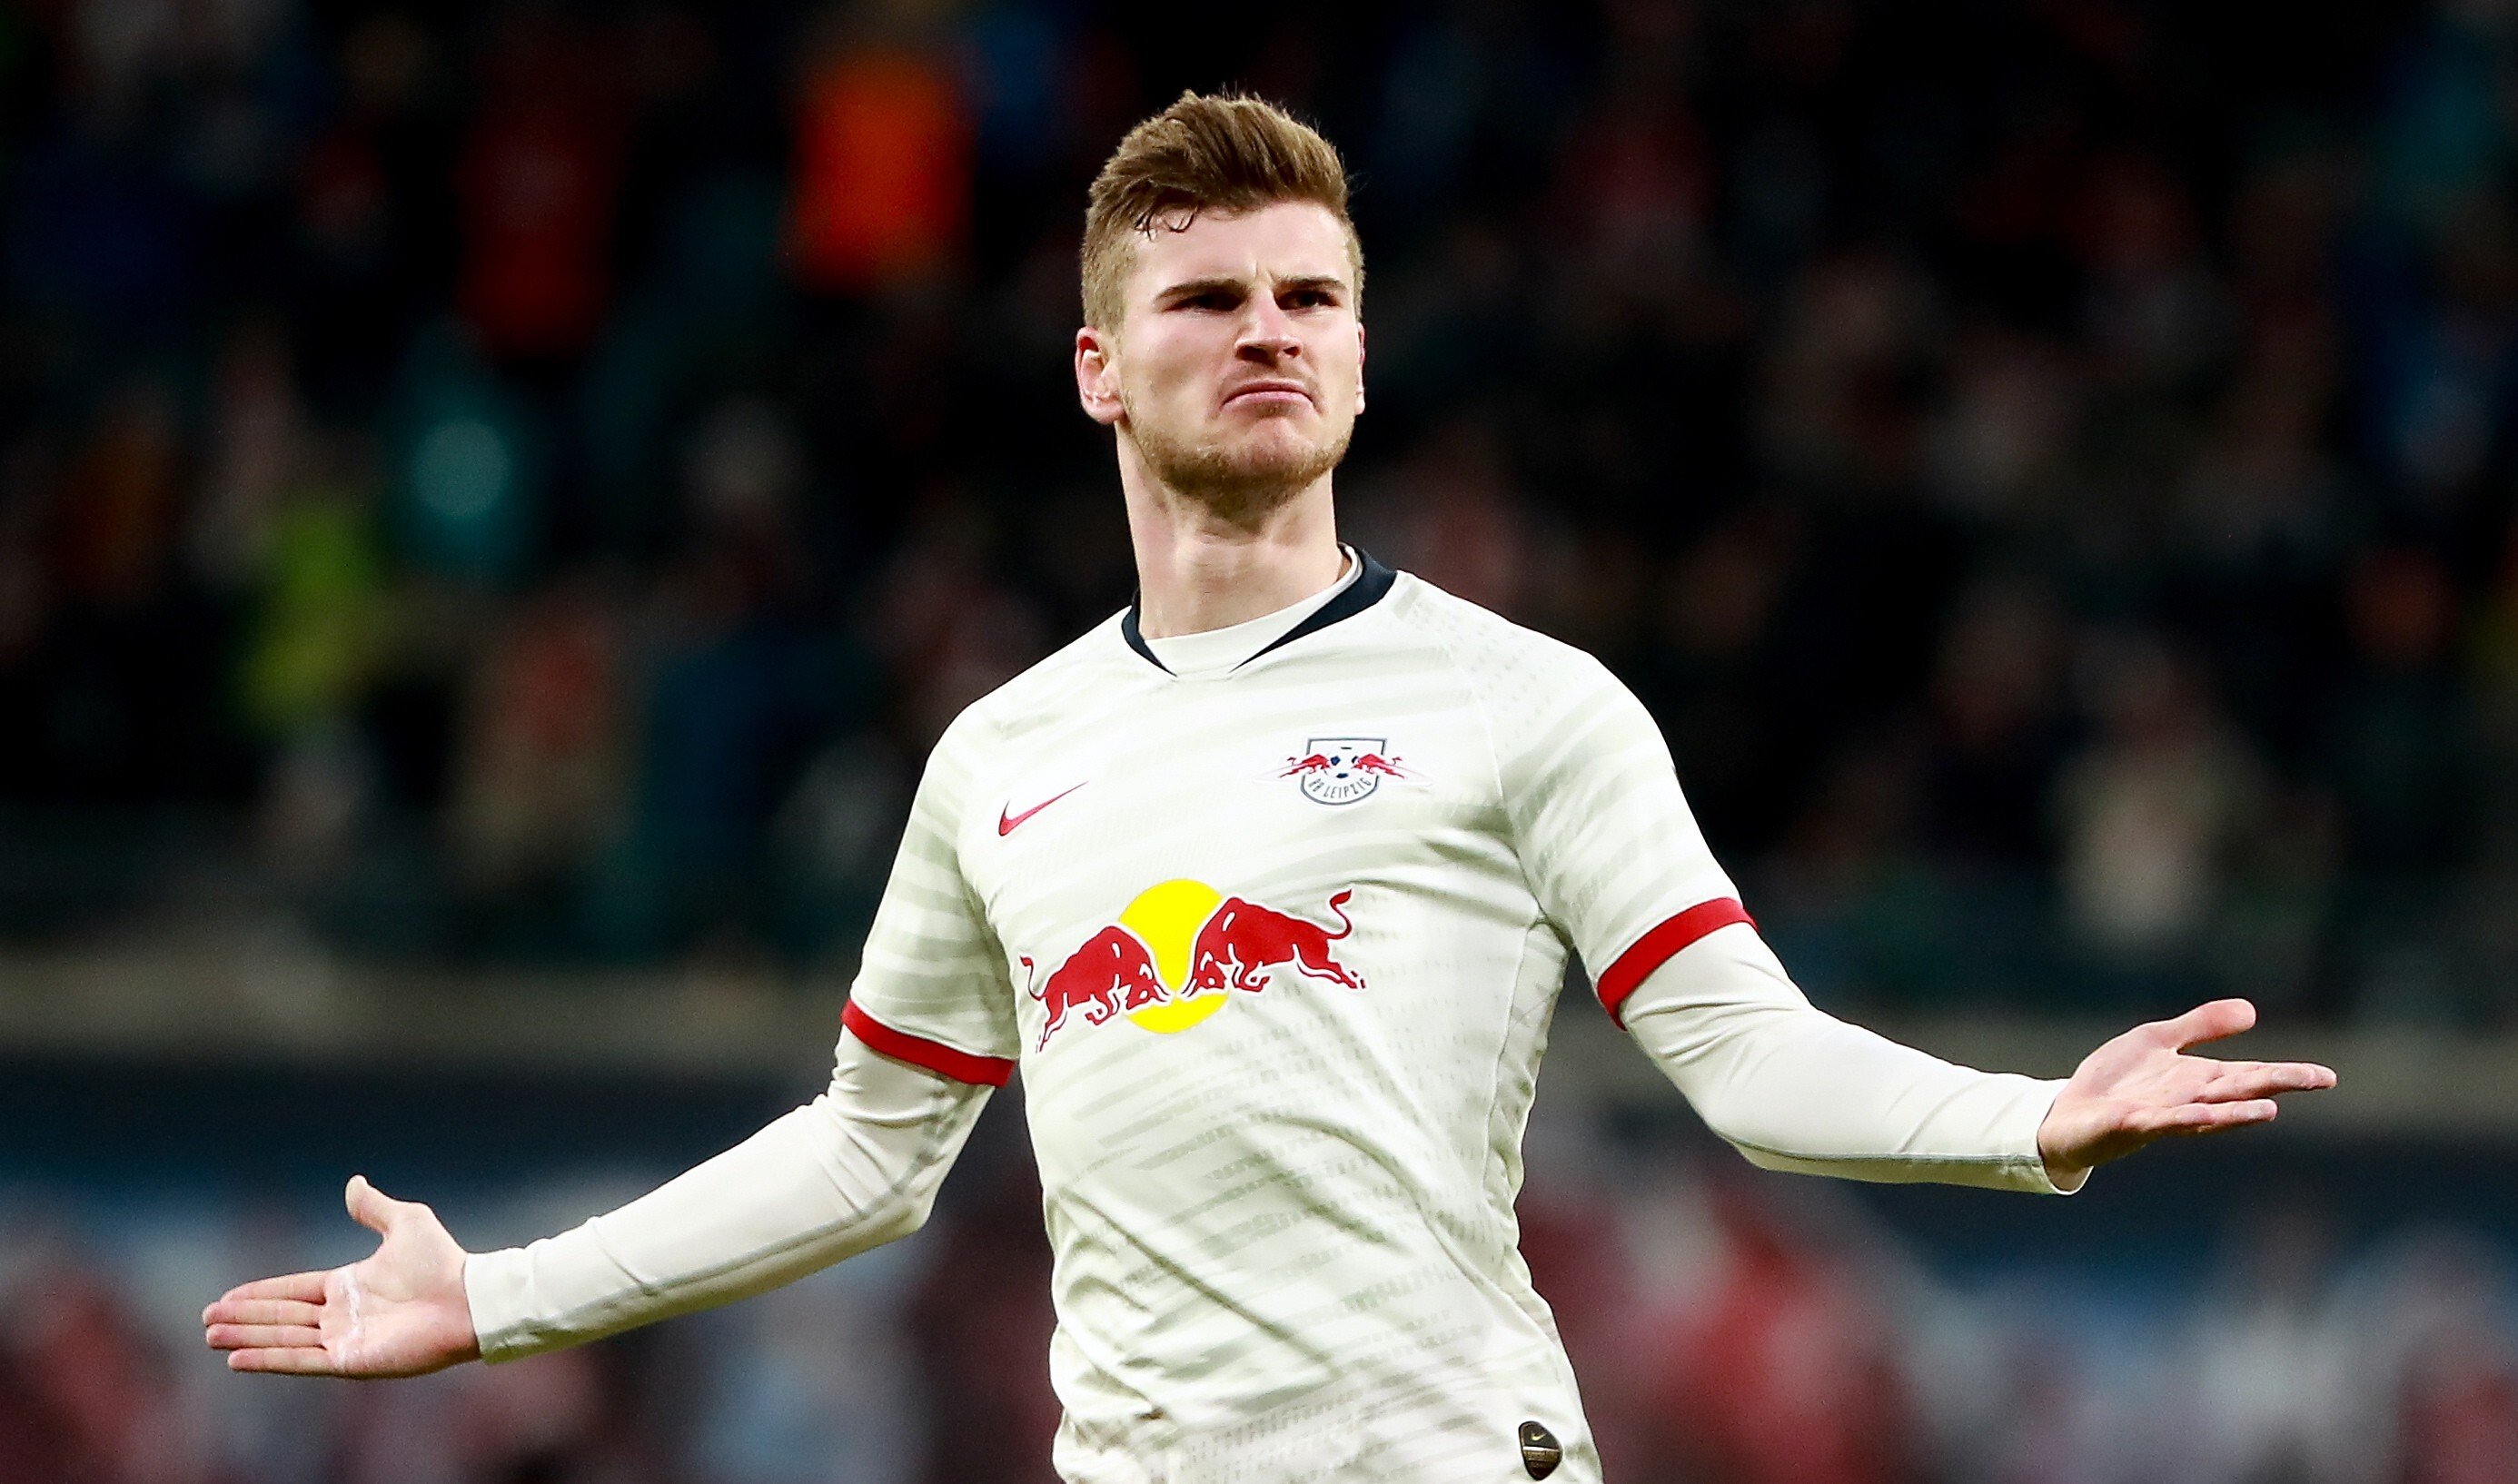 RB Leipzig’s Timo Werner looks set for a switch to Chelsea. Photo: EPA